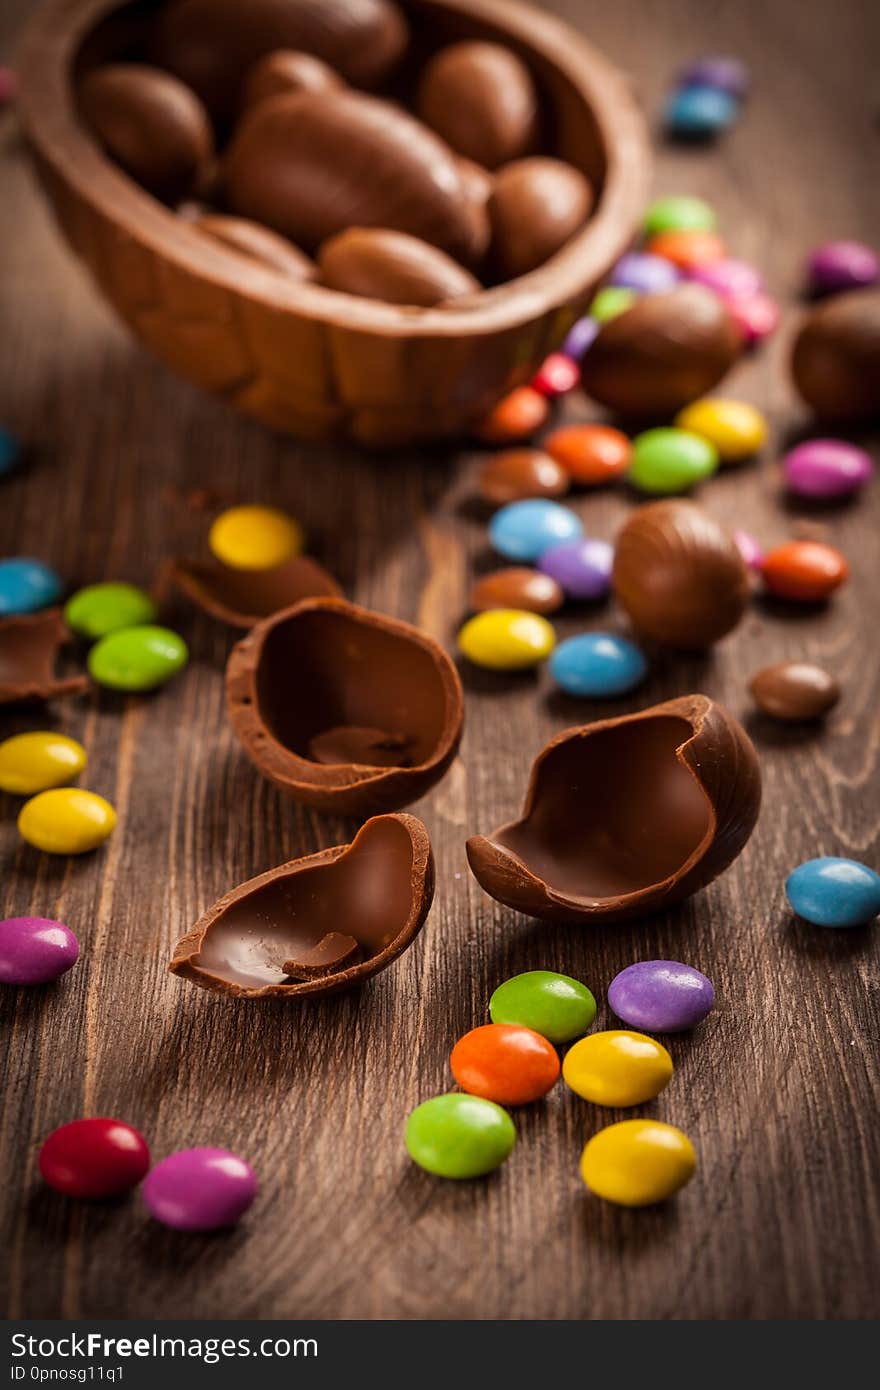 Sweet chocolate eggs for Easter. Sweet chocolate eggs for Easter